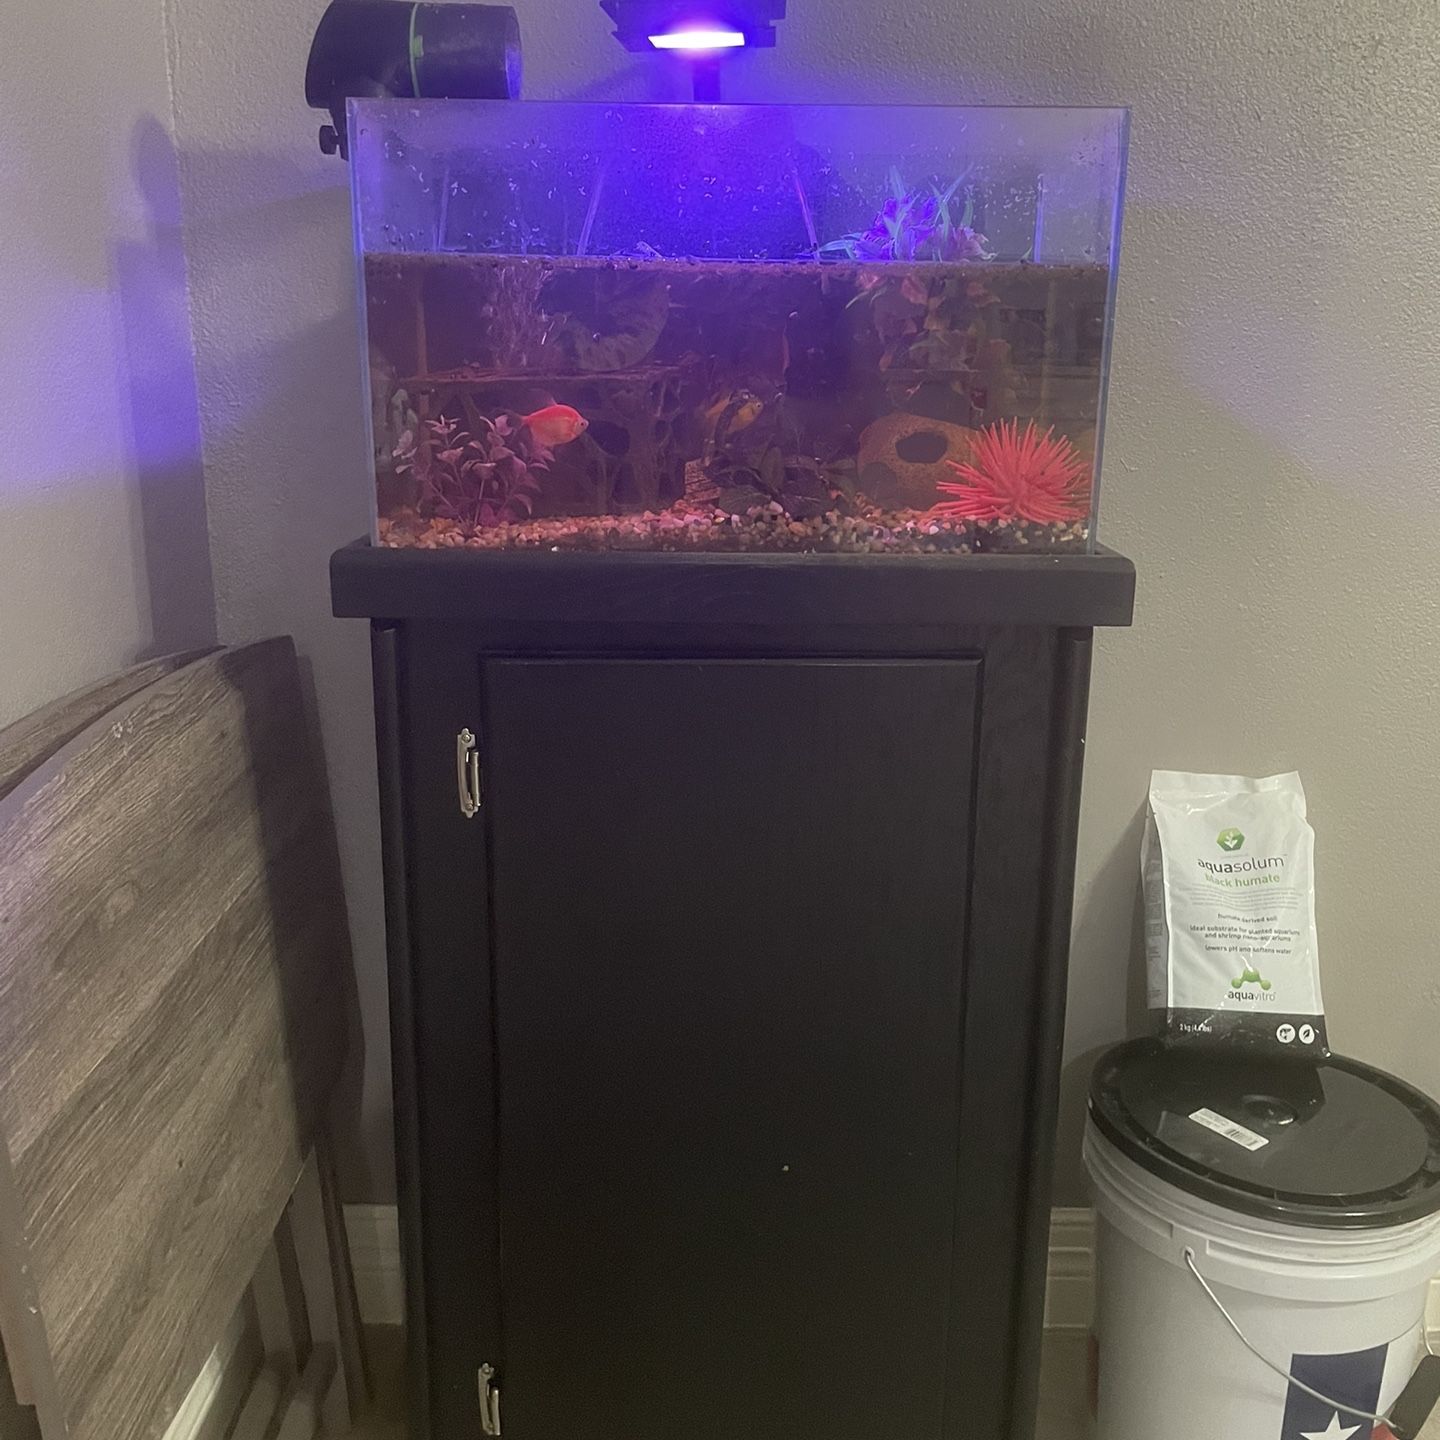 10 Gallon Fish Tank With stand, Fish Can Come With It, As Well As Auto Feeder And Fluval Light